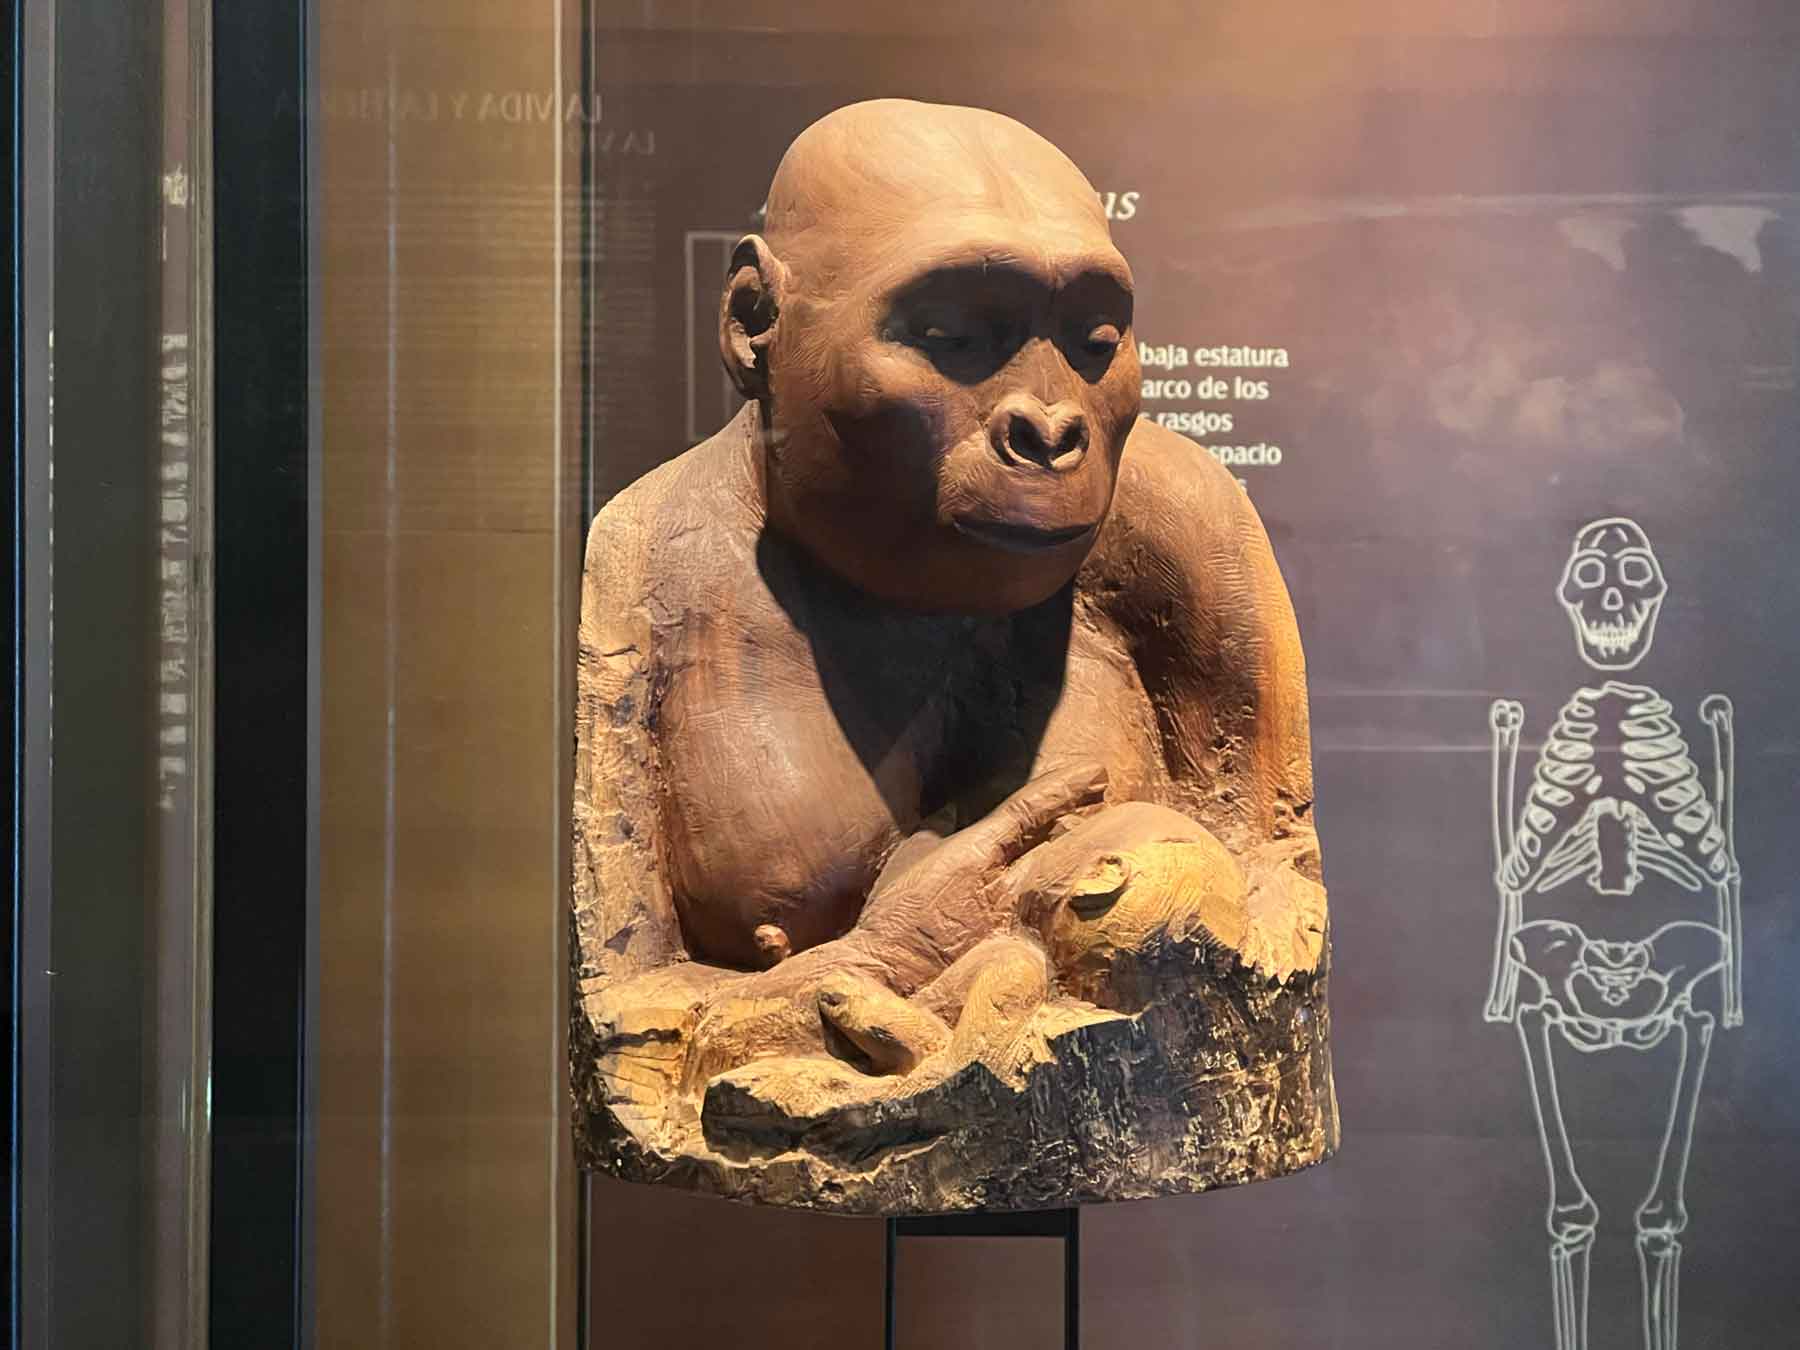 Wooden sculpted bust of Australopithecus afarensis breastfeeding an infant, with diagram of Lucy skeleton in background